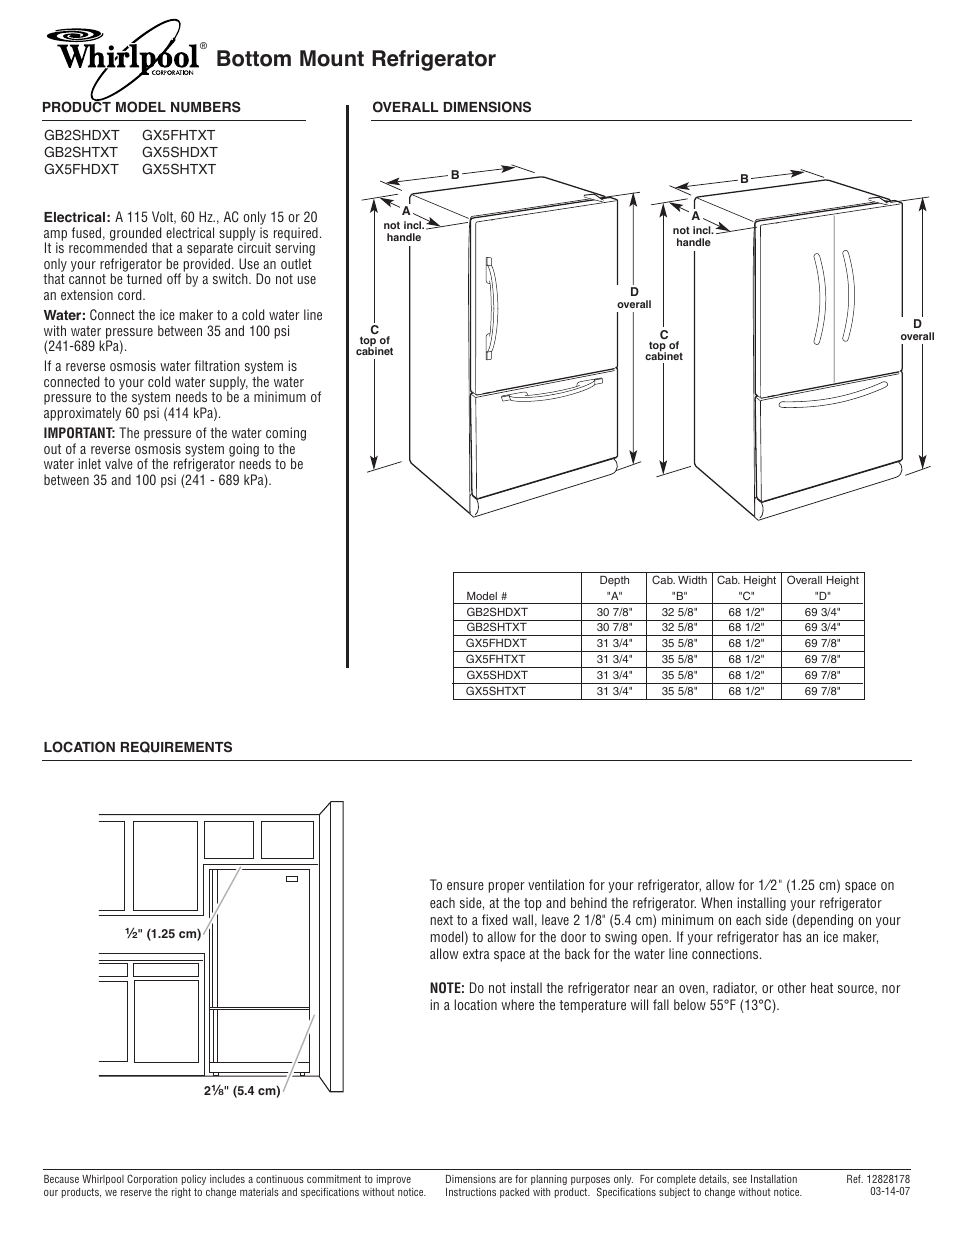 Whirlpool BOTTOM MOUNT REFRIGERATOR GX5FHTXT User Manual | 1 page